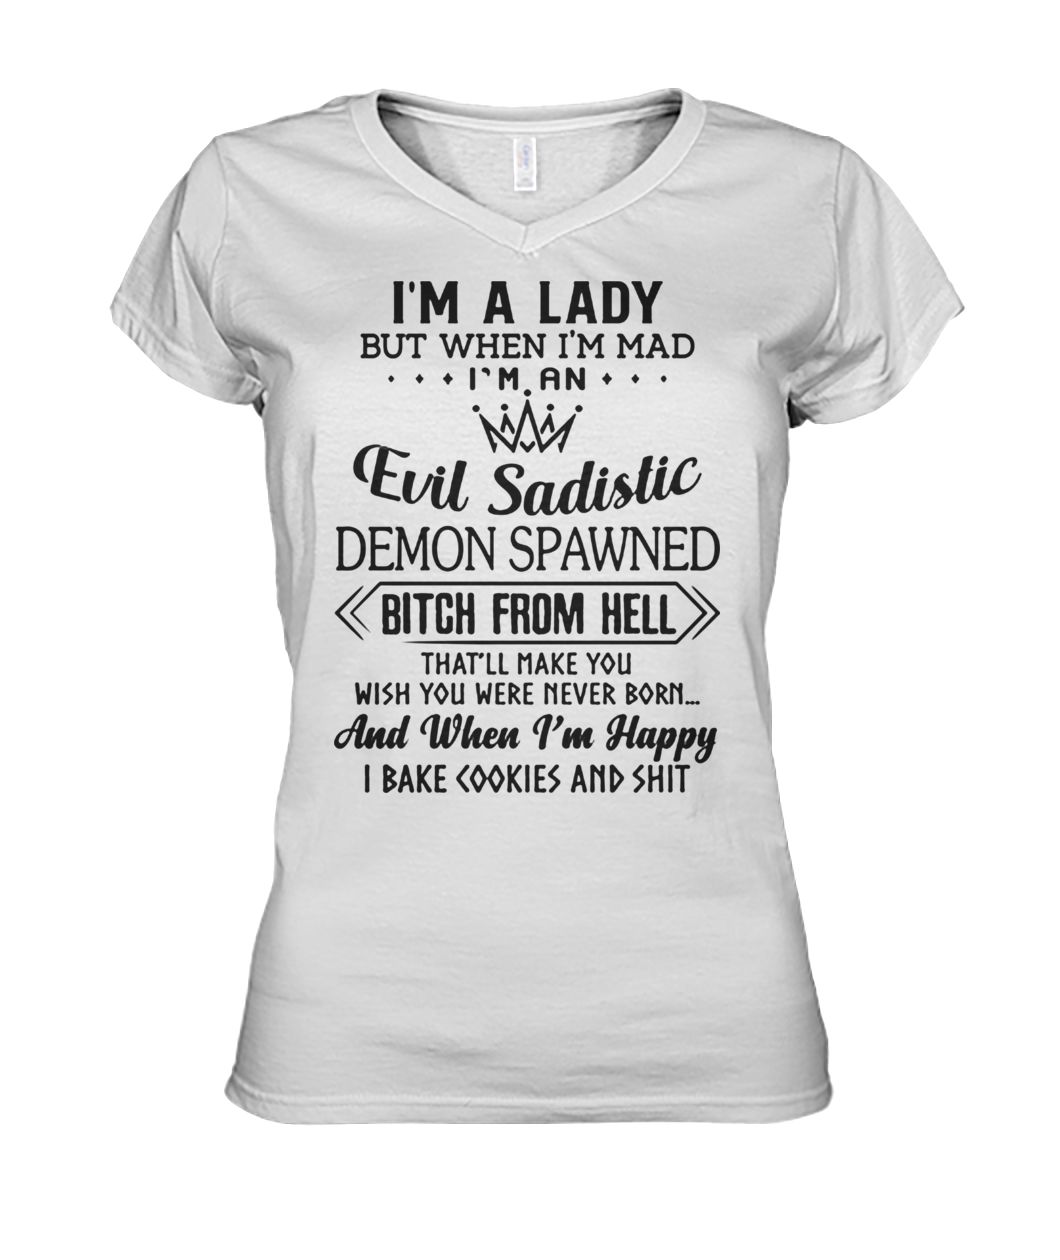 I’m a lady but when I’m mad I’m an evil sadistic demon spawned bitch from hell that'll make you women's v-neck